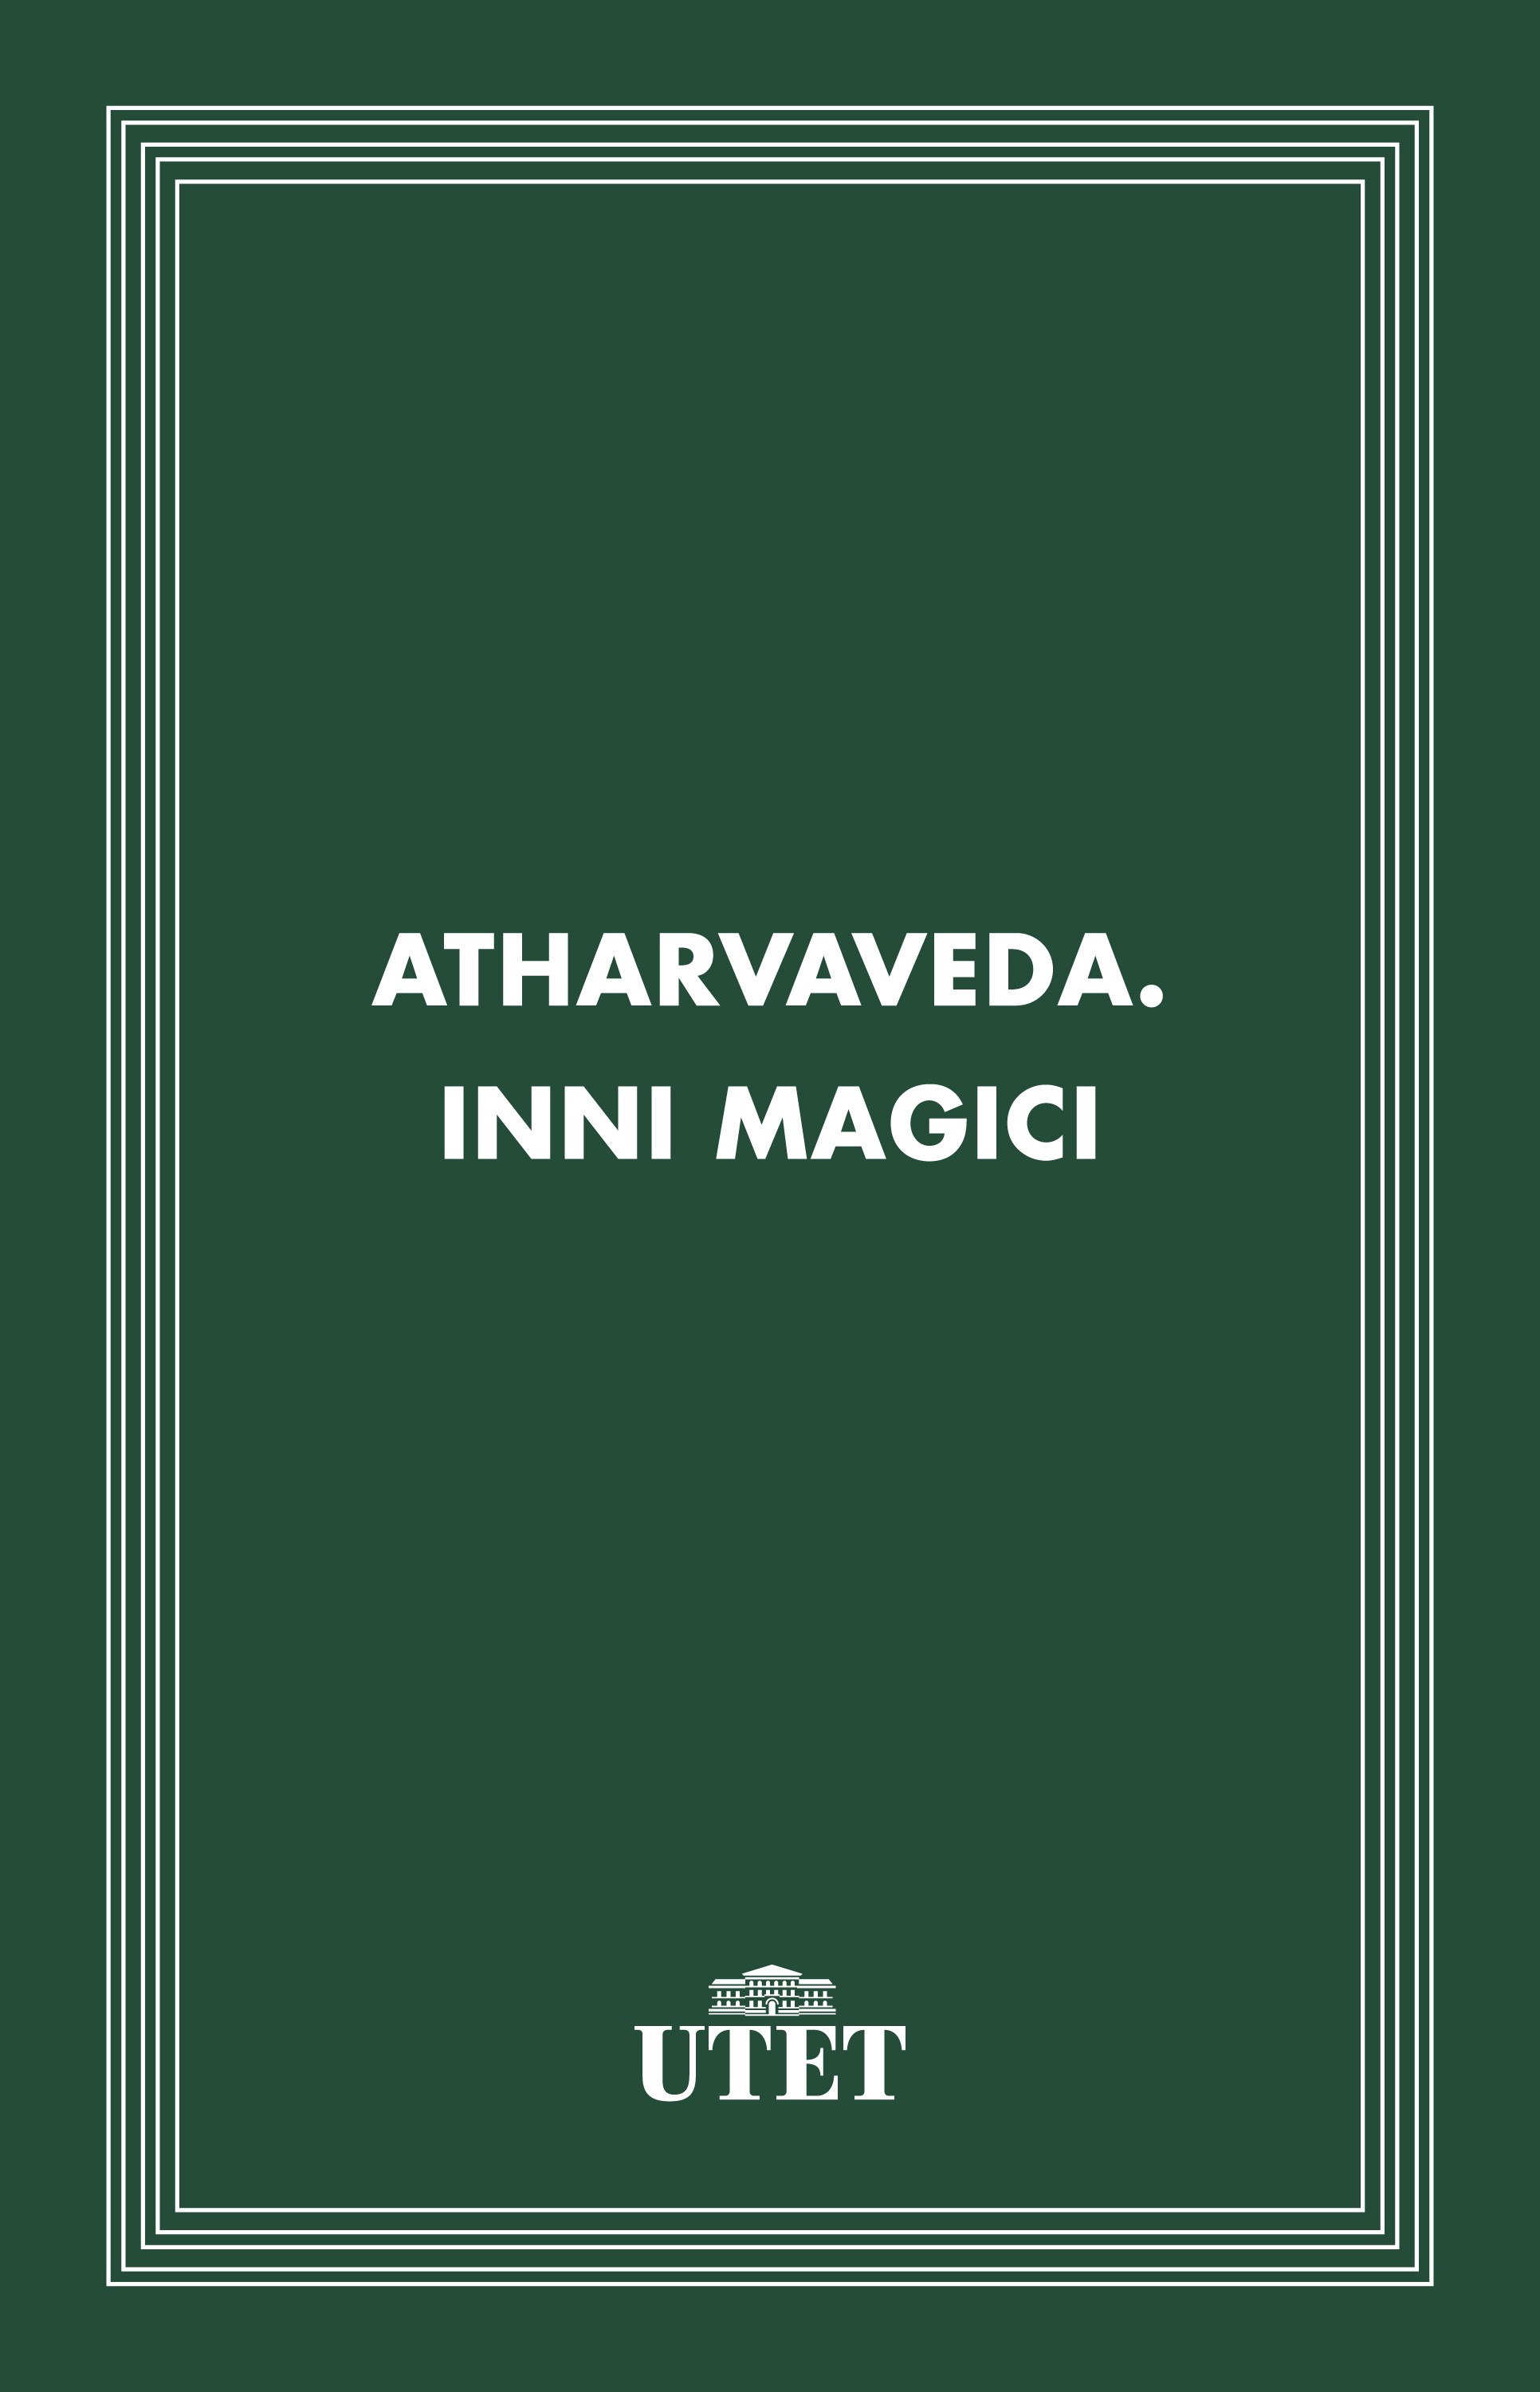 Atharvaveda. Inni magici - Librerie.coop